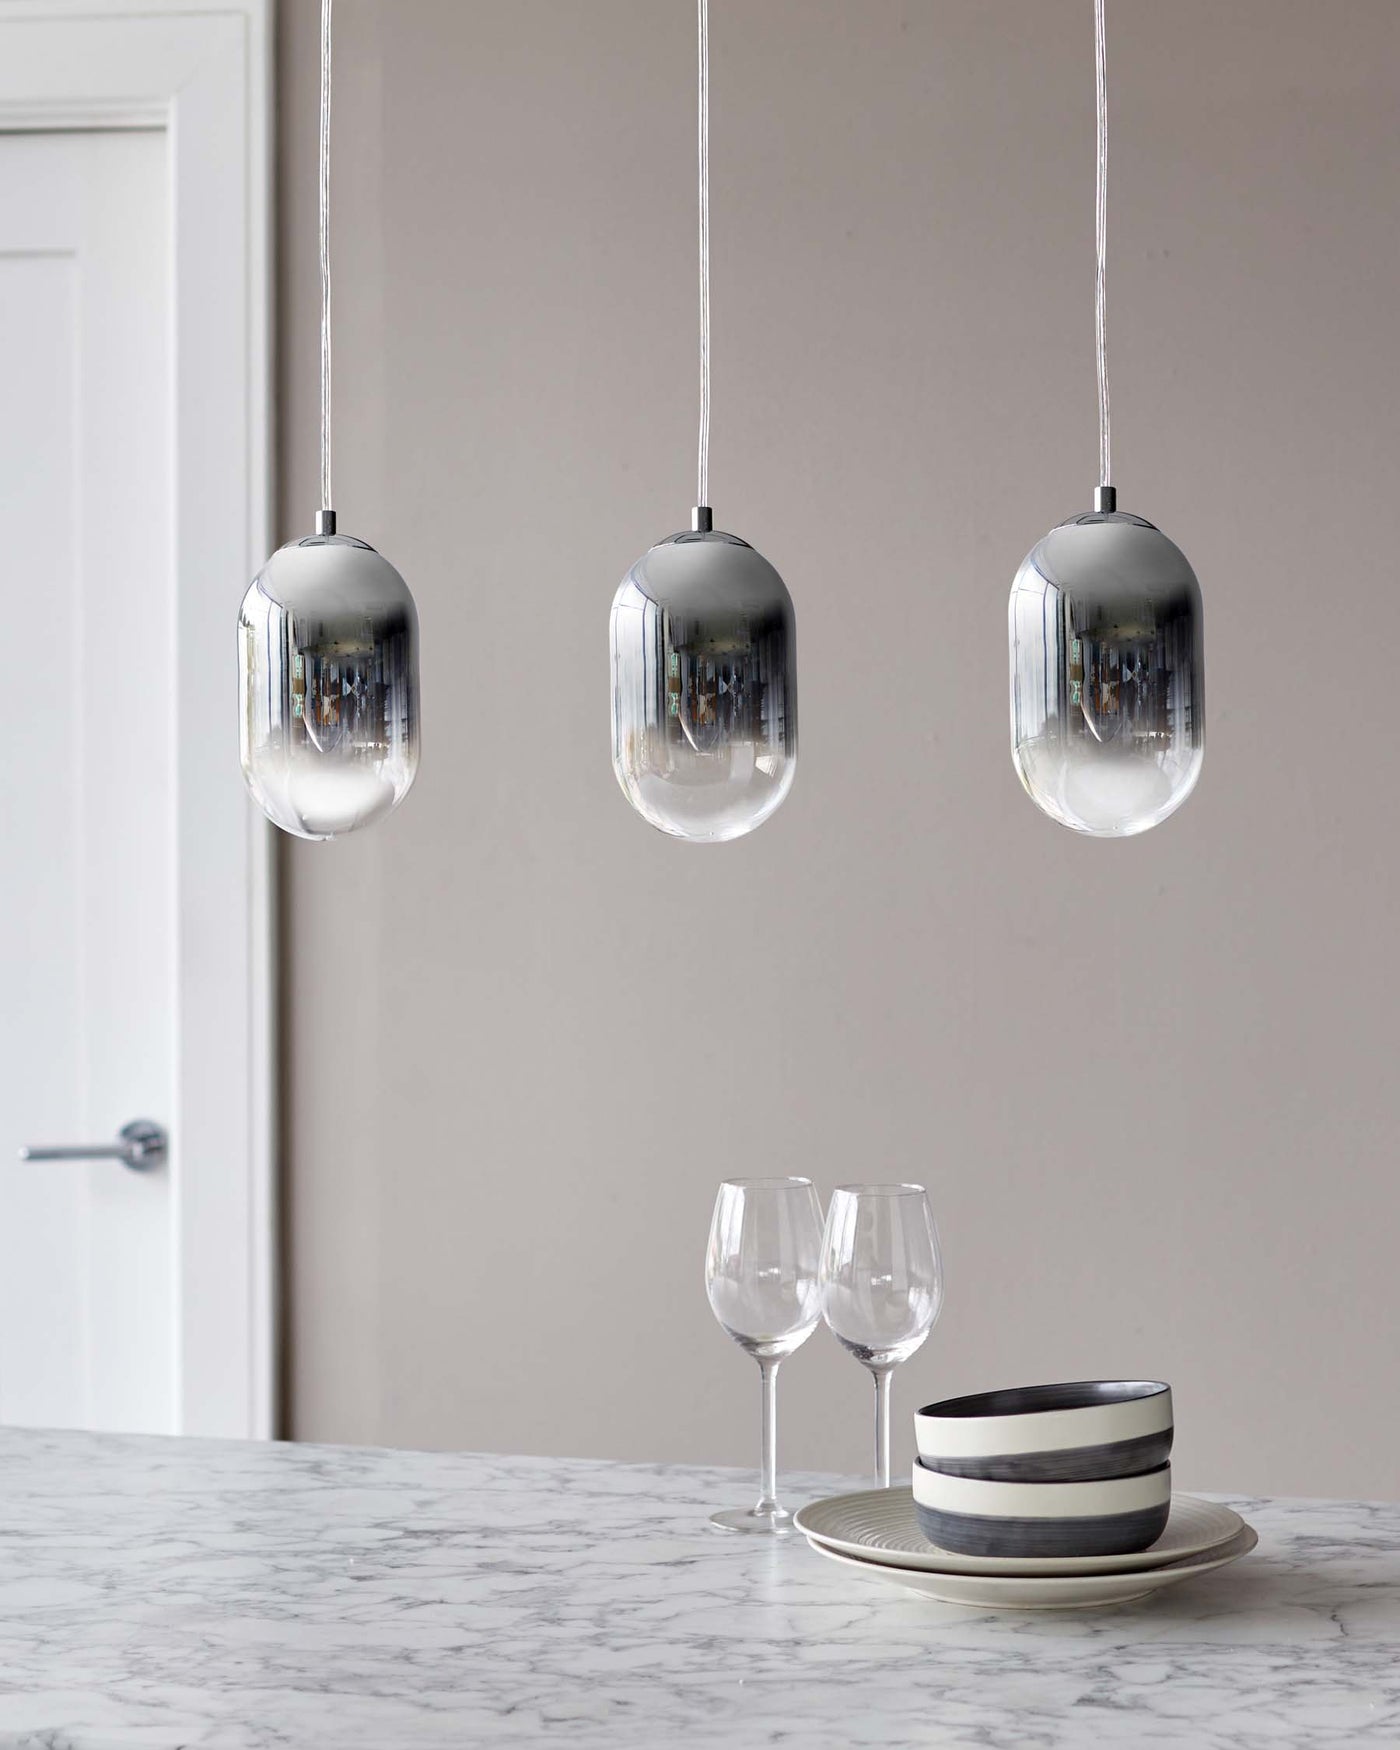 Elegant marble countertop paired with three sleek pendant lights featuring transparent glass shades and cylindrical silver tops, suspended by slender cables.